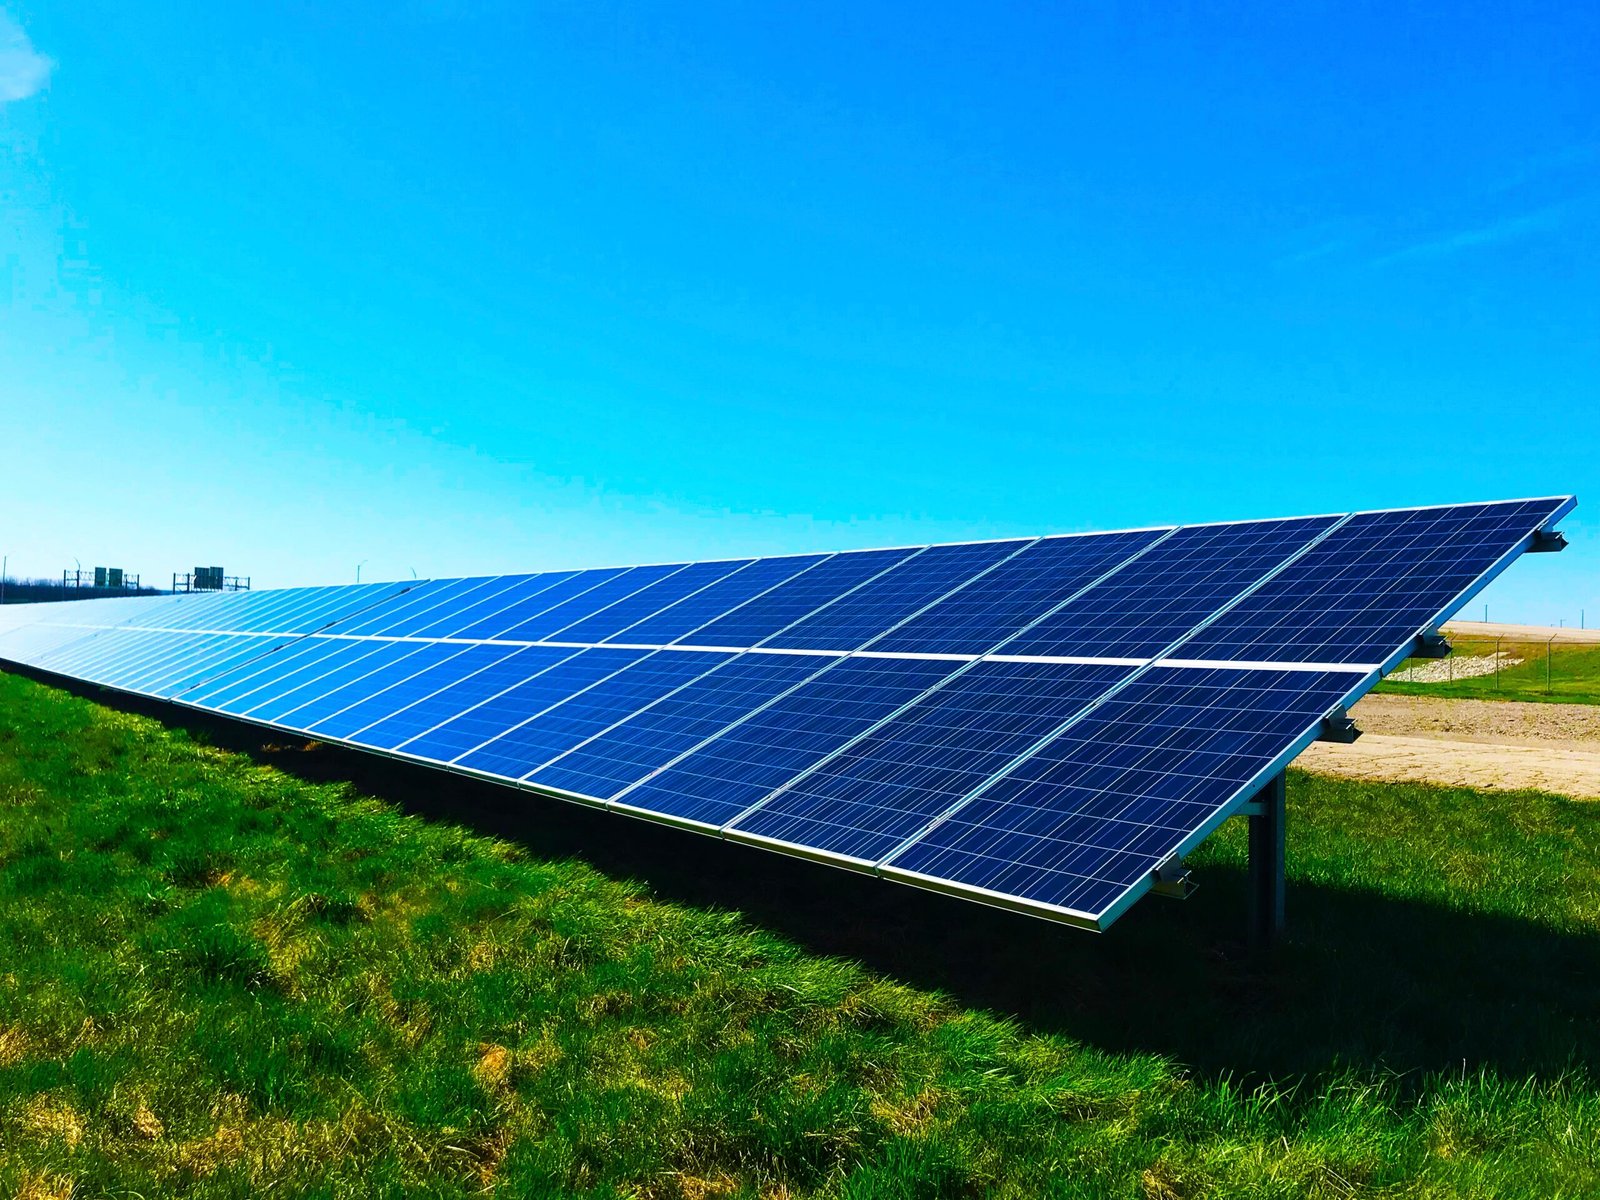 Solar power is the most well-known form of green energy